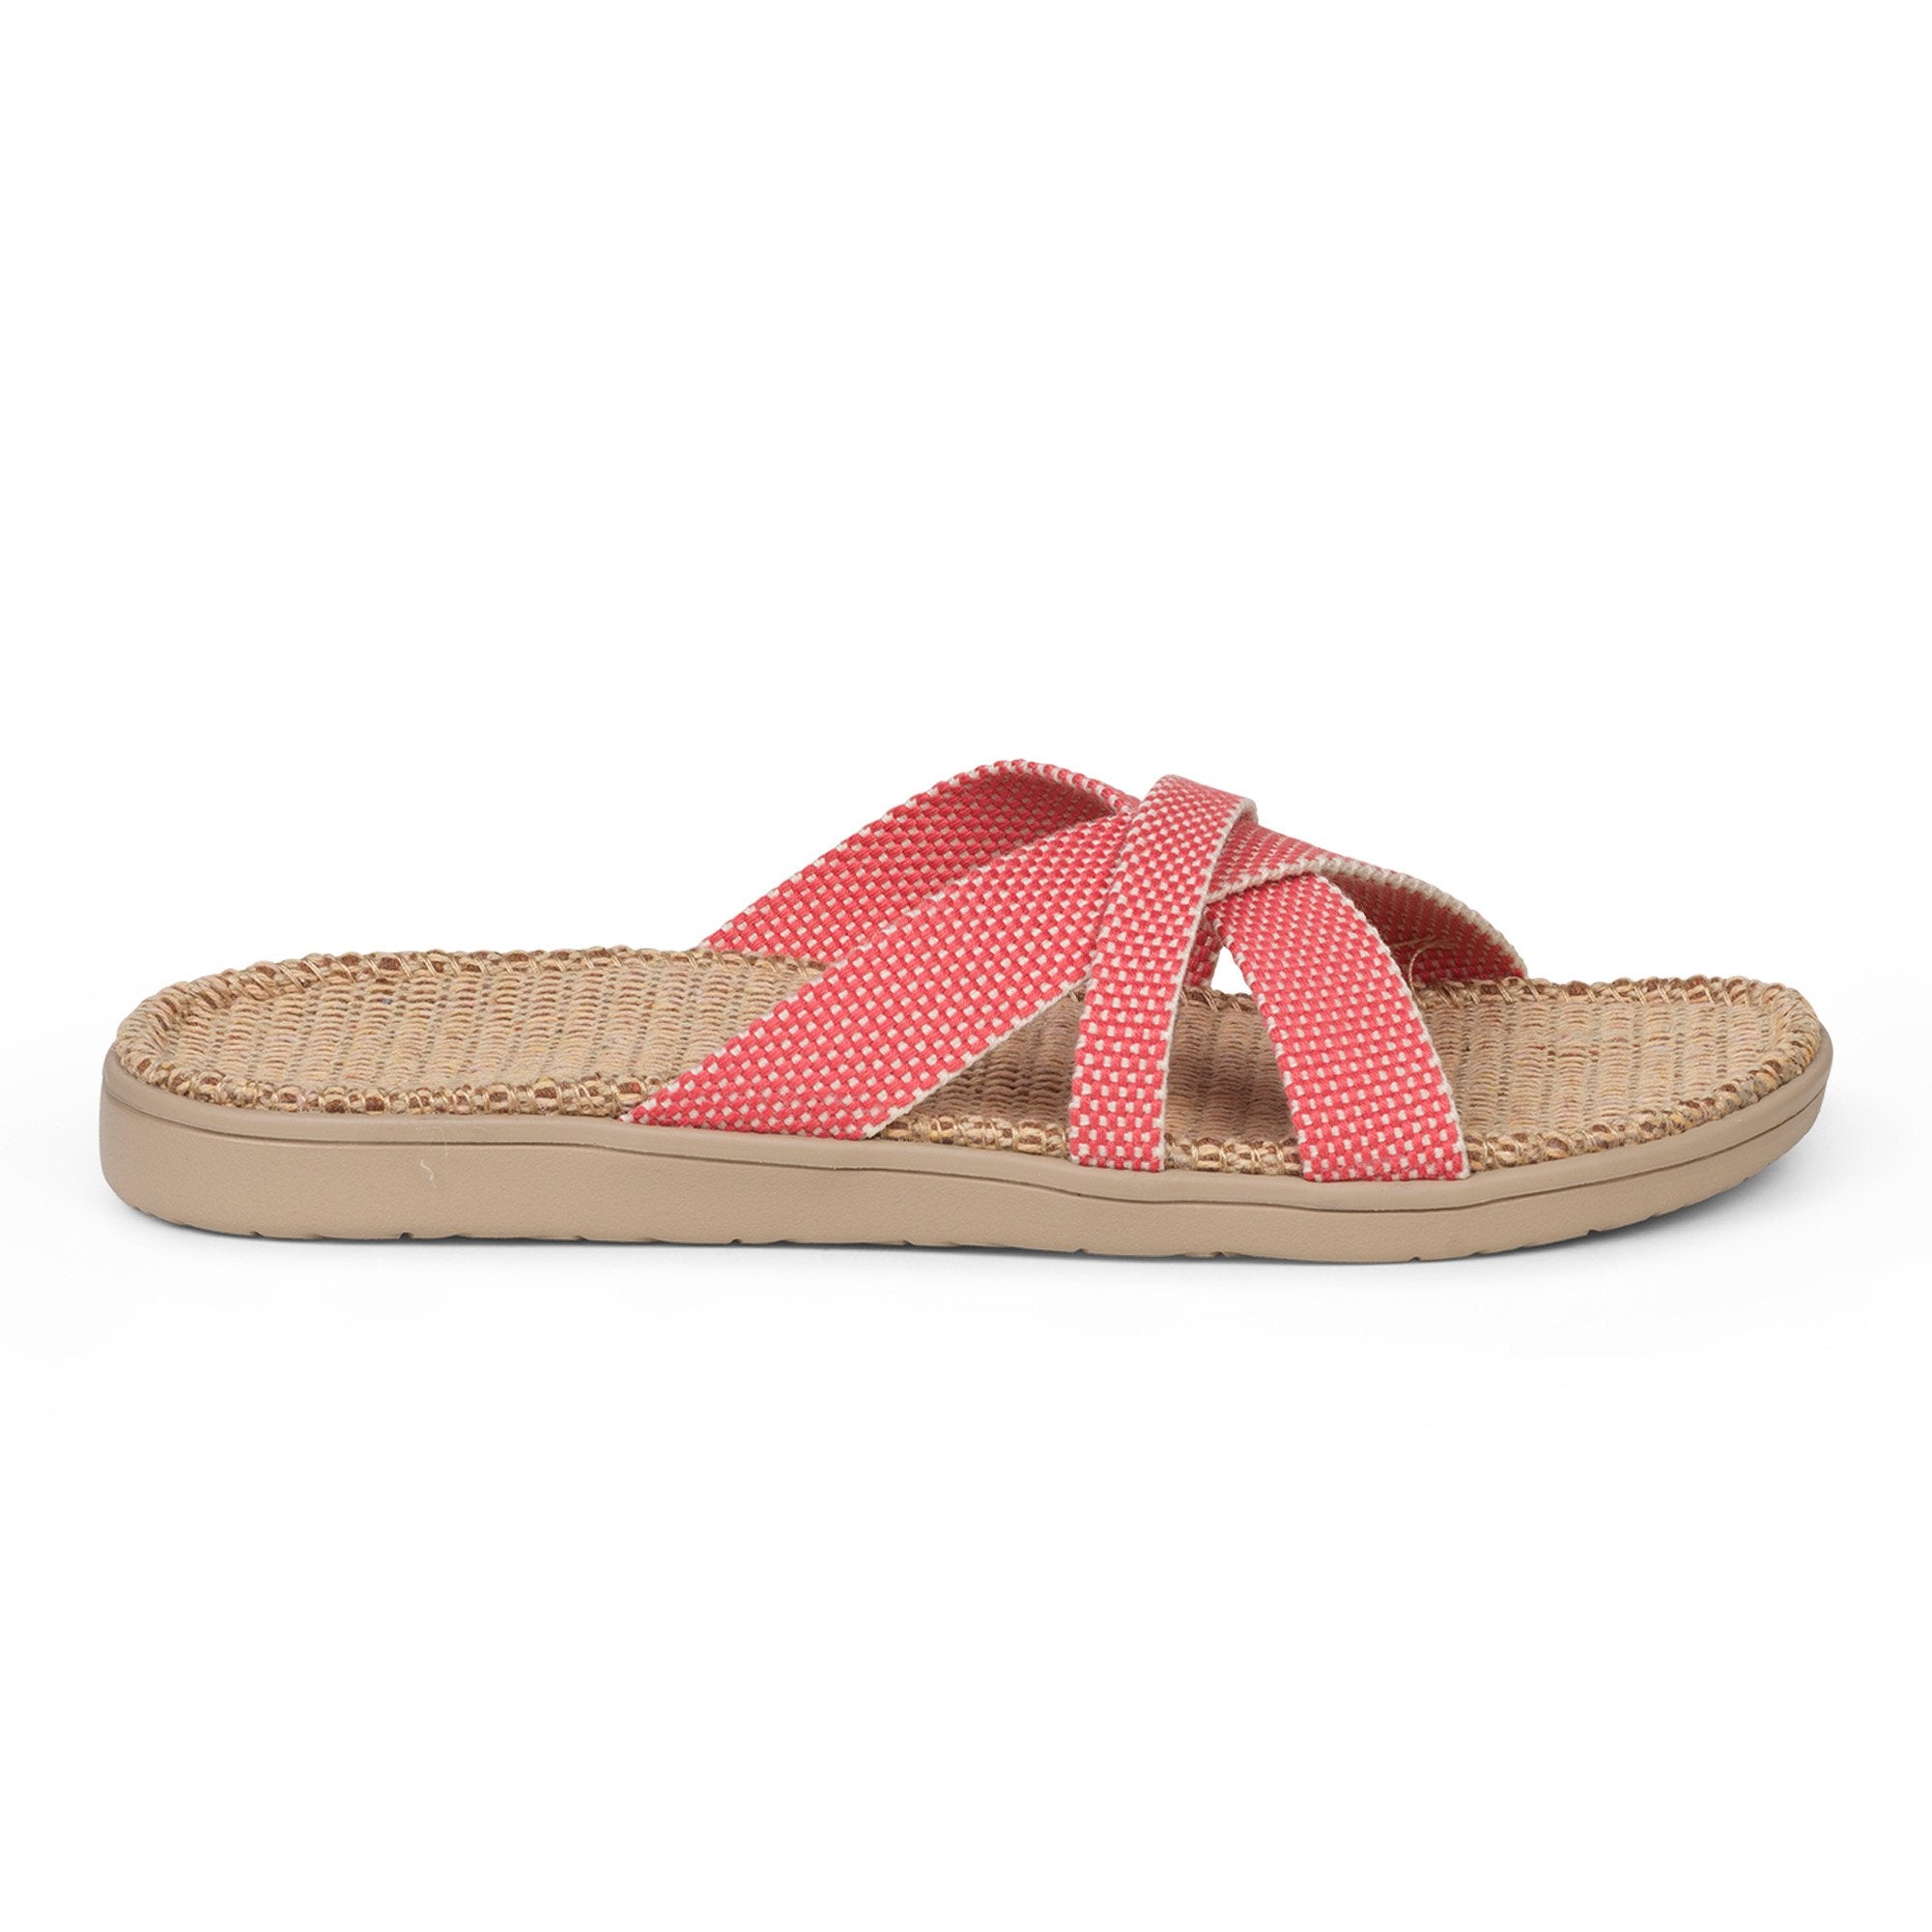 Summer sandals from danish brand Lovelies. The rubber sole is nice and soft which makes the sandal very comfortable. The inner sole is covered with woven jute and the straps are med of fine cotton.